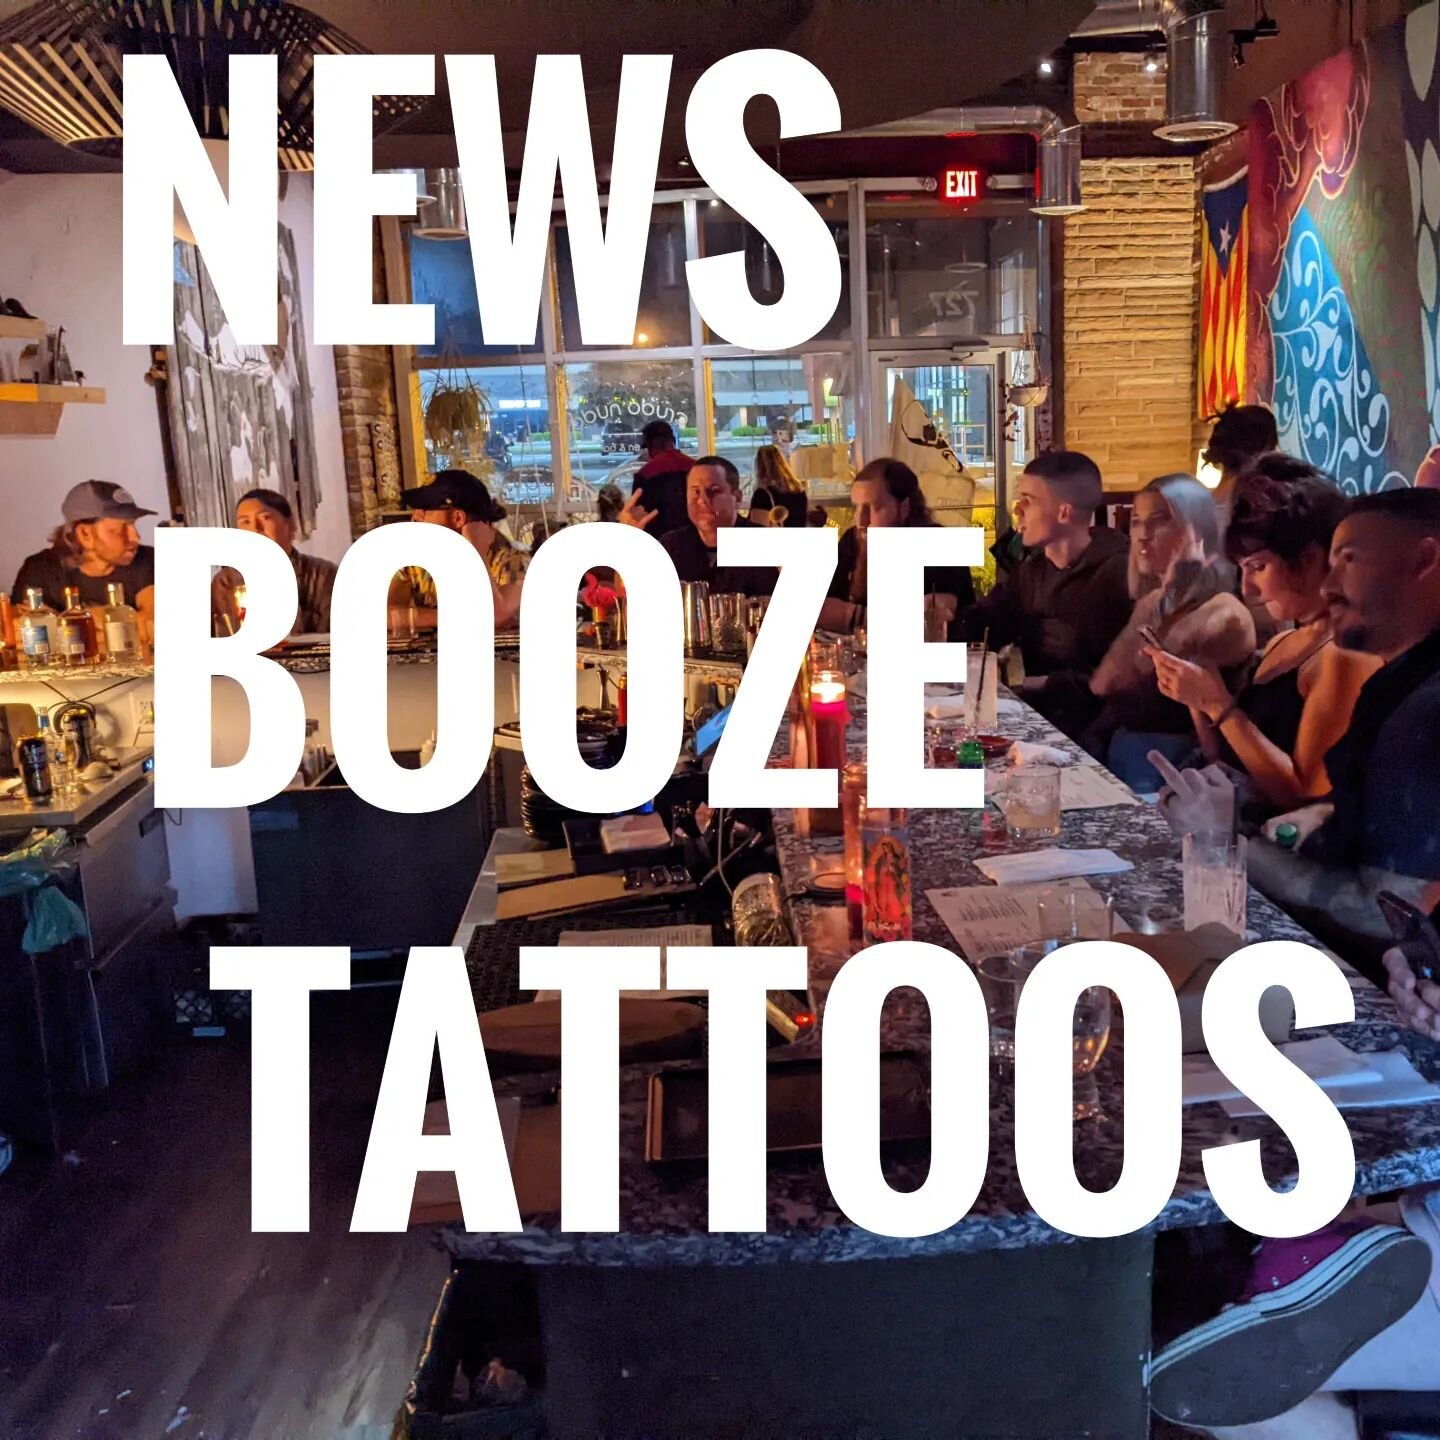 Get ready, y'all, we're back this month with a real doozy! 
.
We're partnering with @colleyavetattoo to bring you a night of tattoo history and revelry. 
.
Our friends from Colley Ave will be around to talk about Norfolk's rich tattoo history, and th